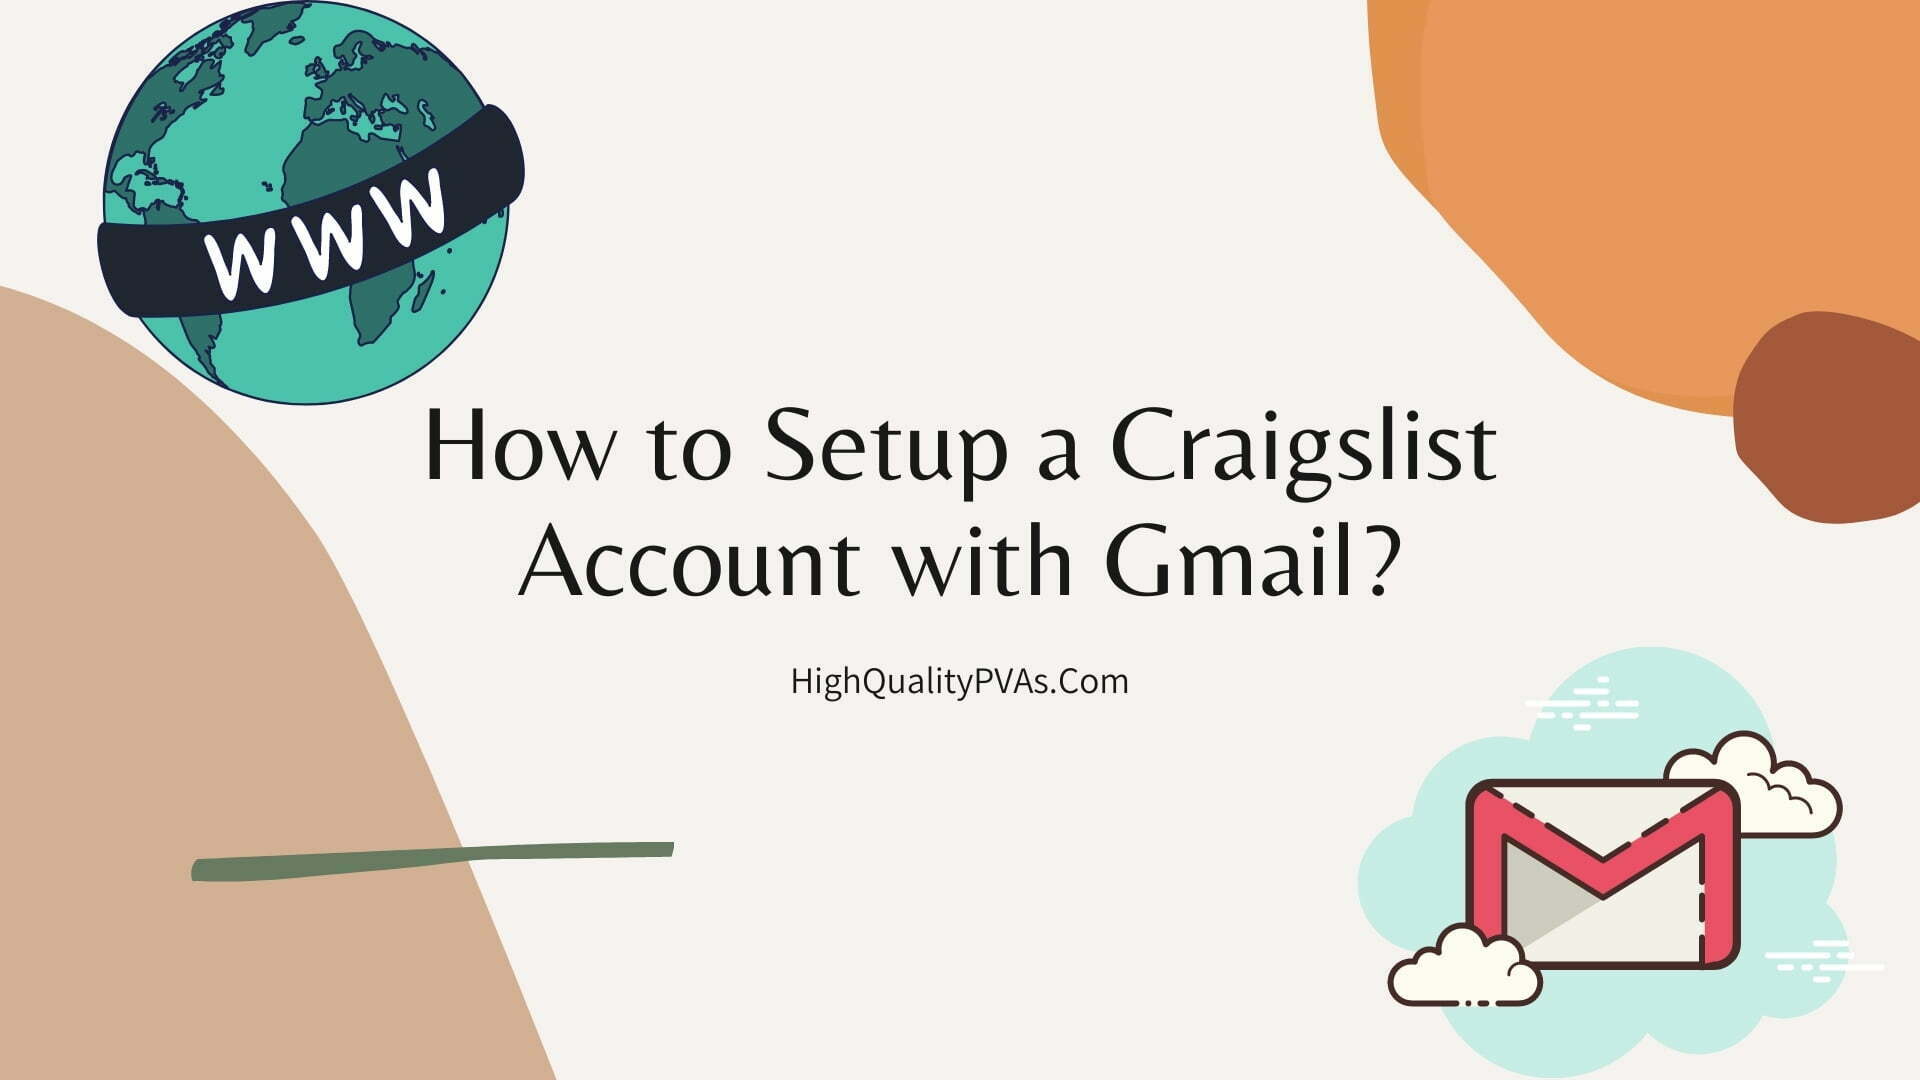 How to Setup a Craigslist Account with Gmail?